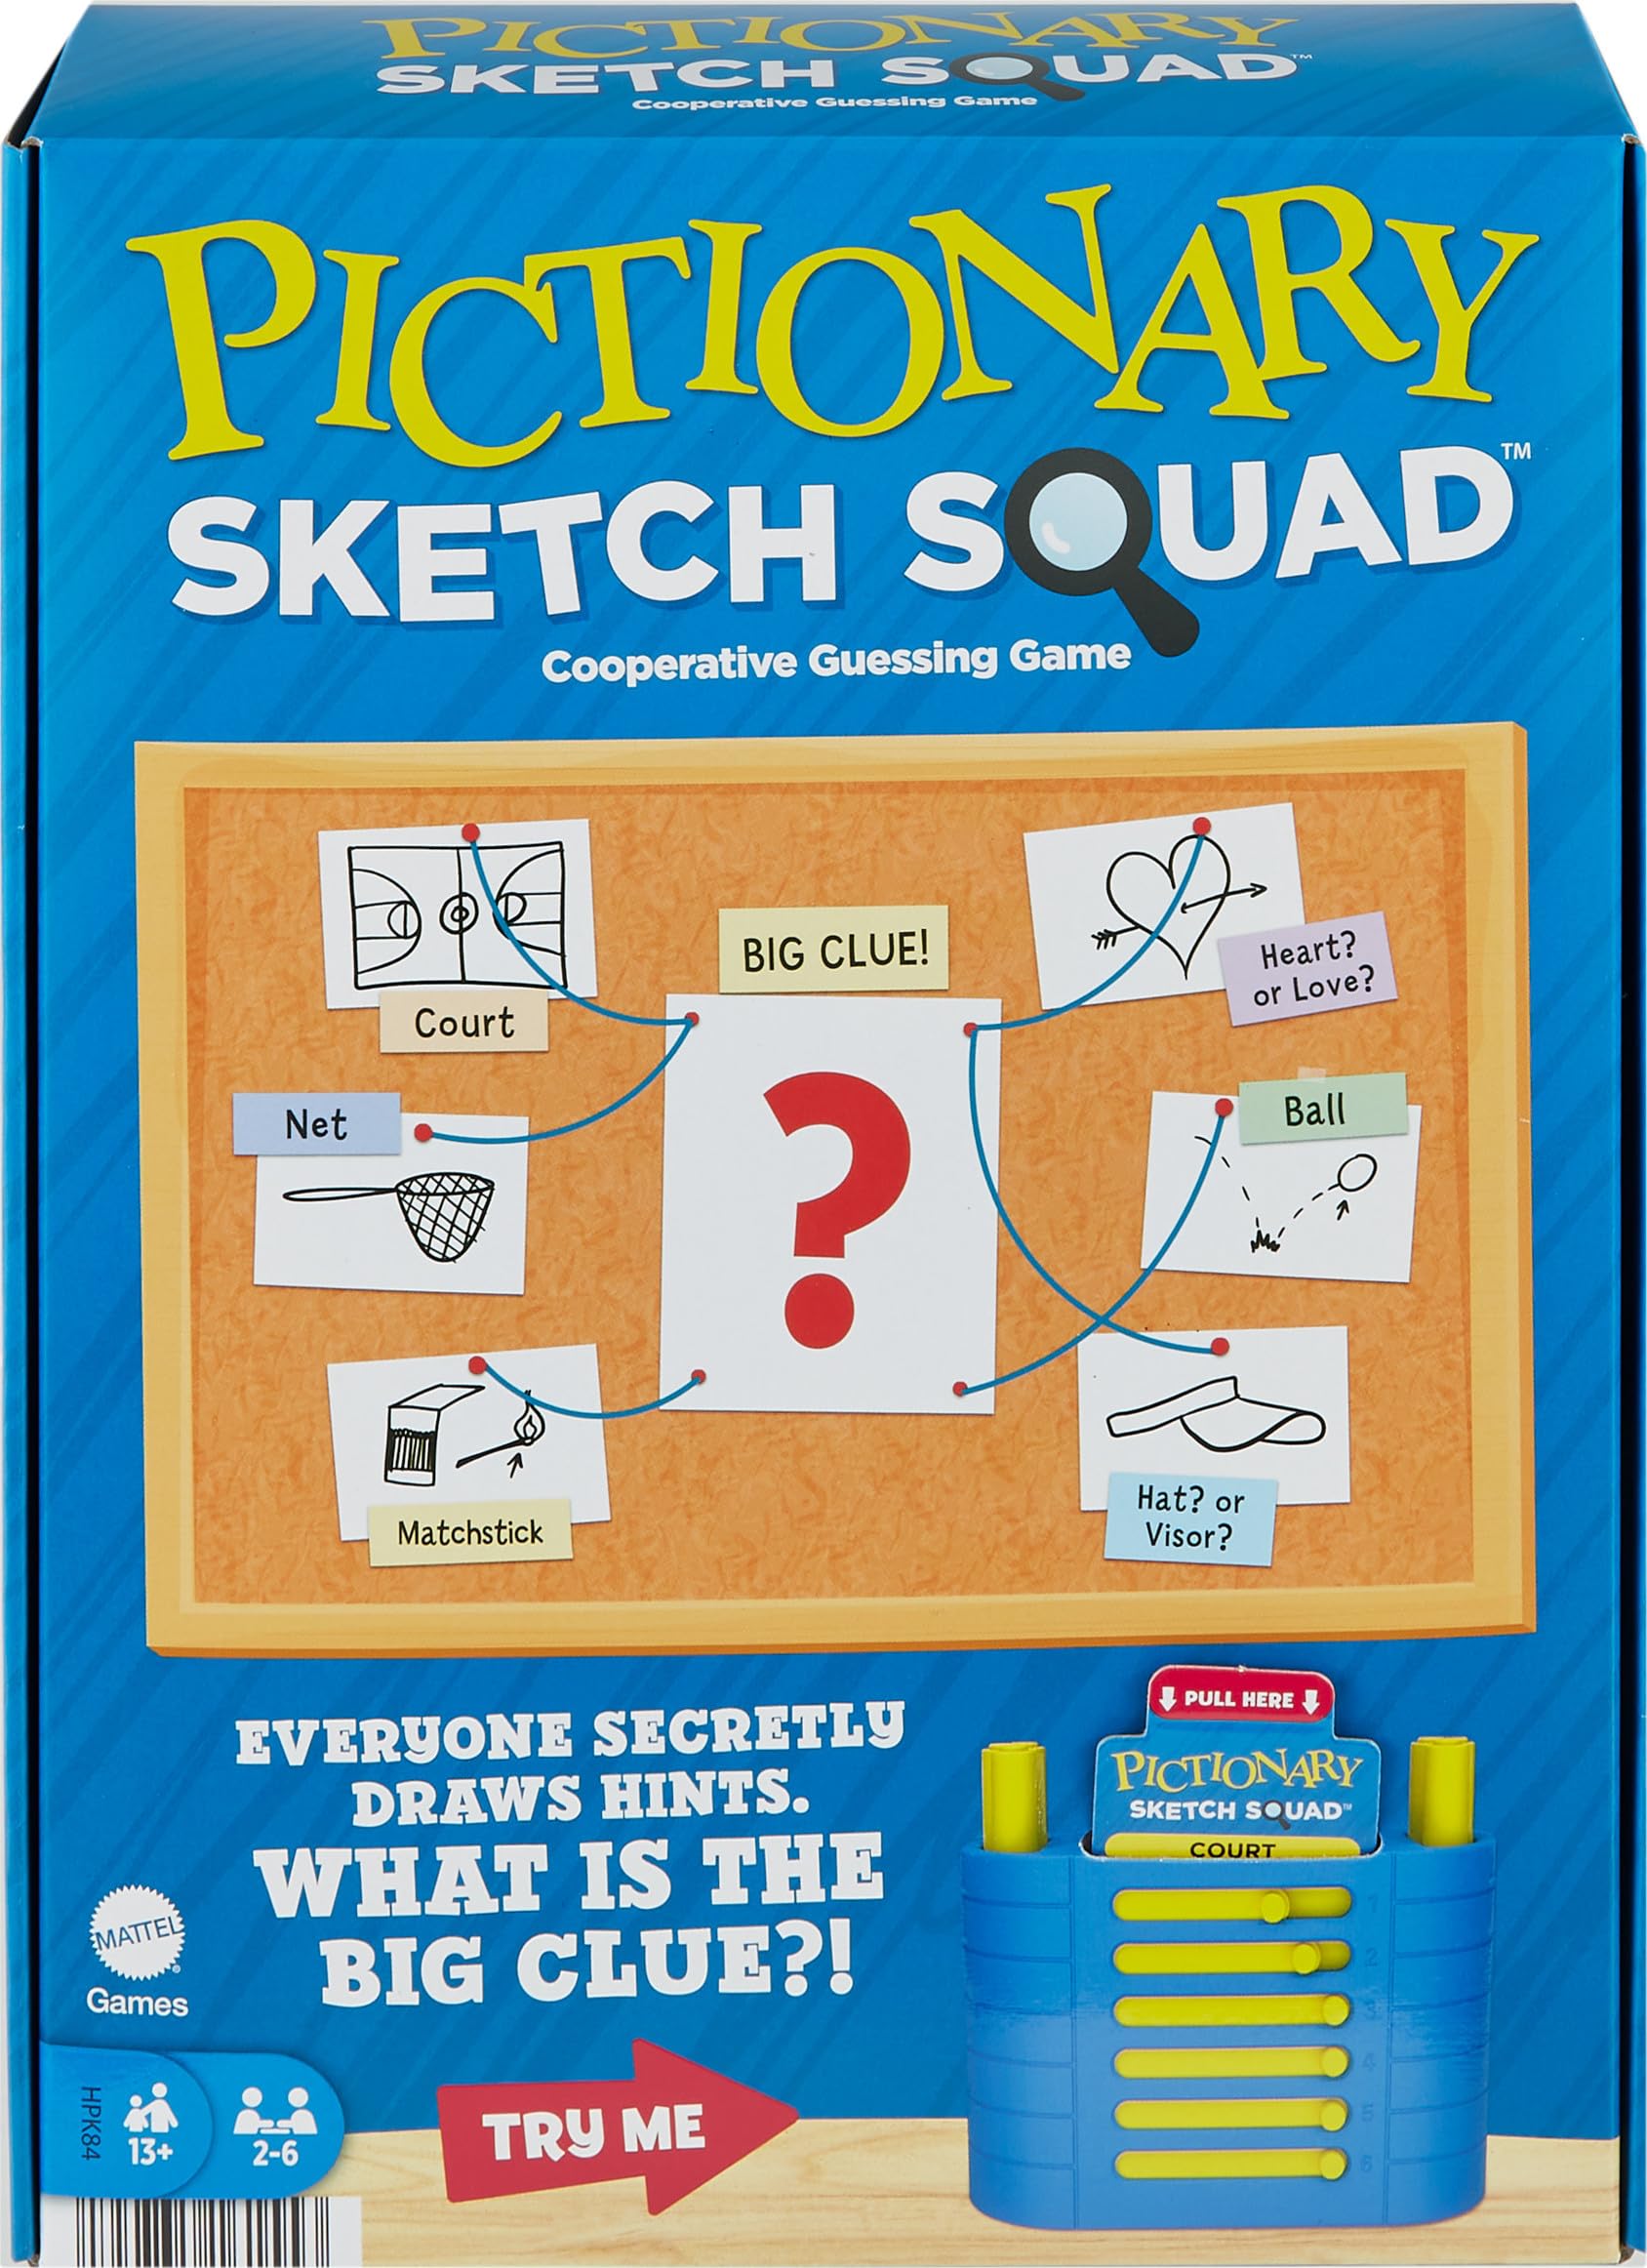 Mattel Games Pictionary Sketch Squad Cooperative Party Game for Adults, Teens and Game Night with Clues Case for 2-6 Players